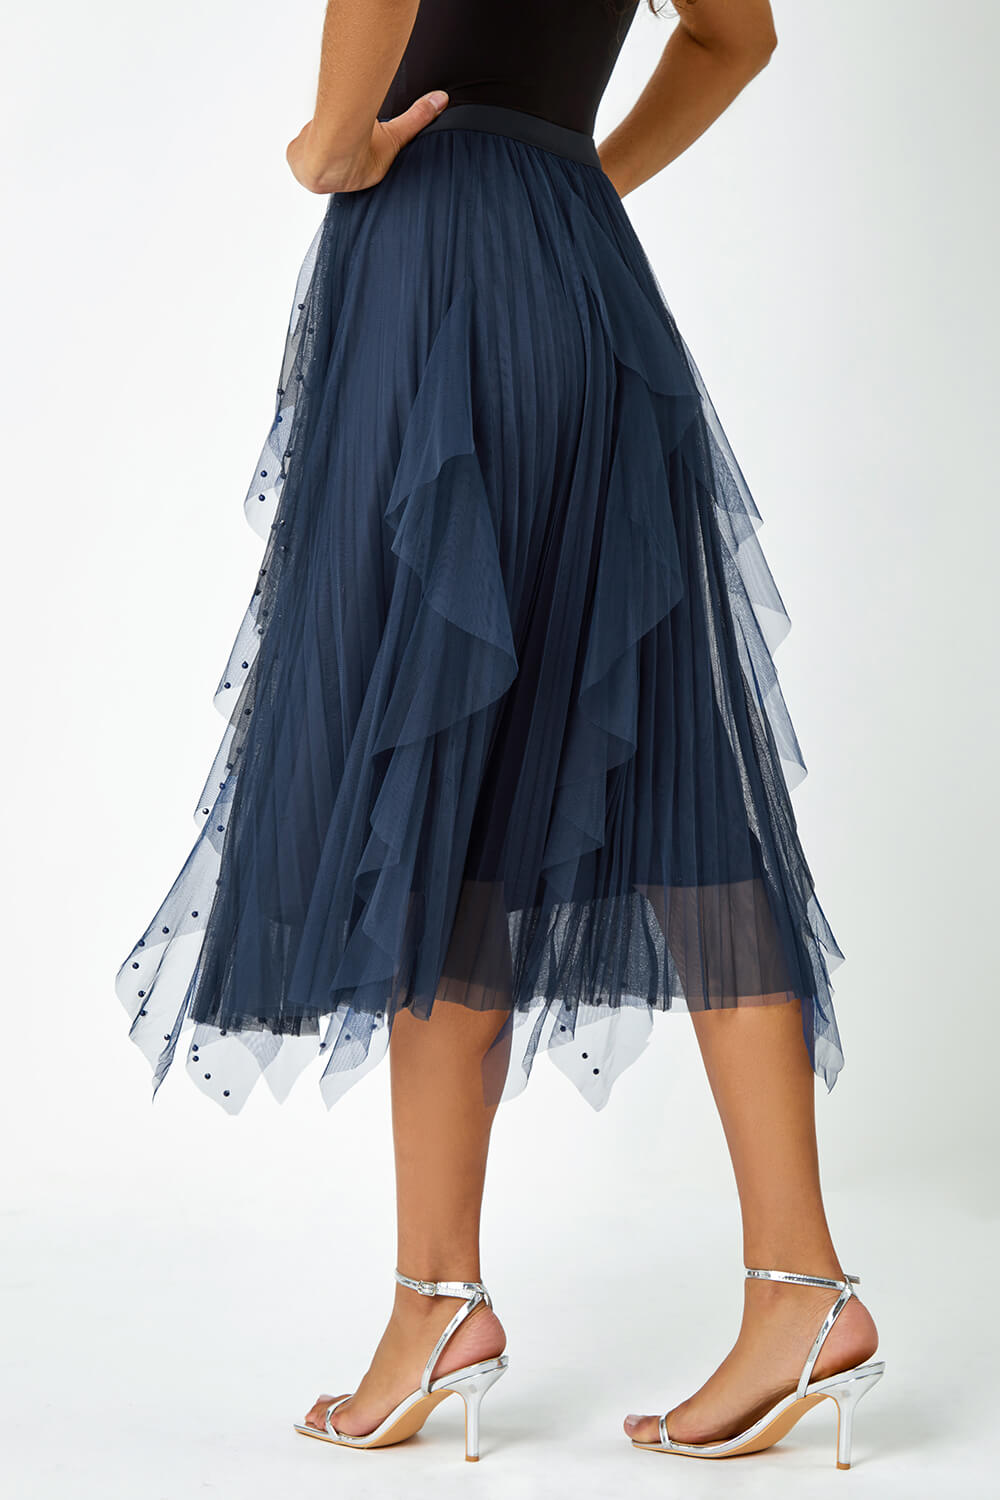 Midnight Blue Elasticated Pearl Mesh Layered Skirt, Image 3 of 5